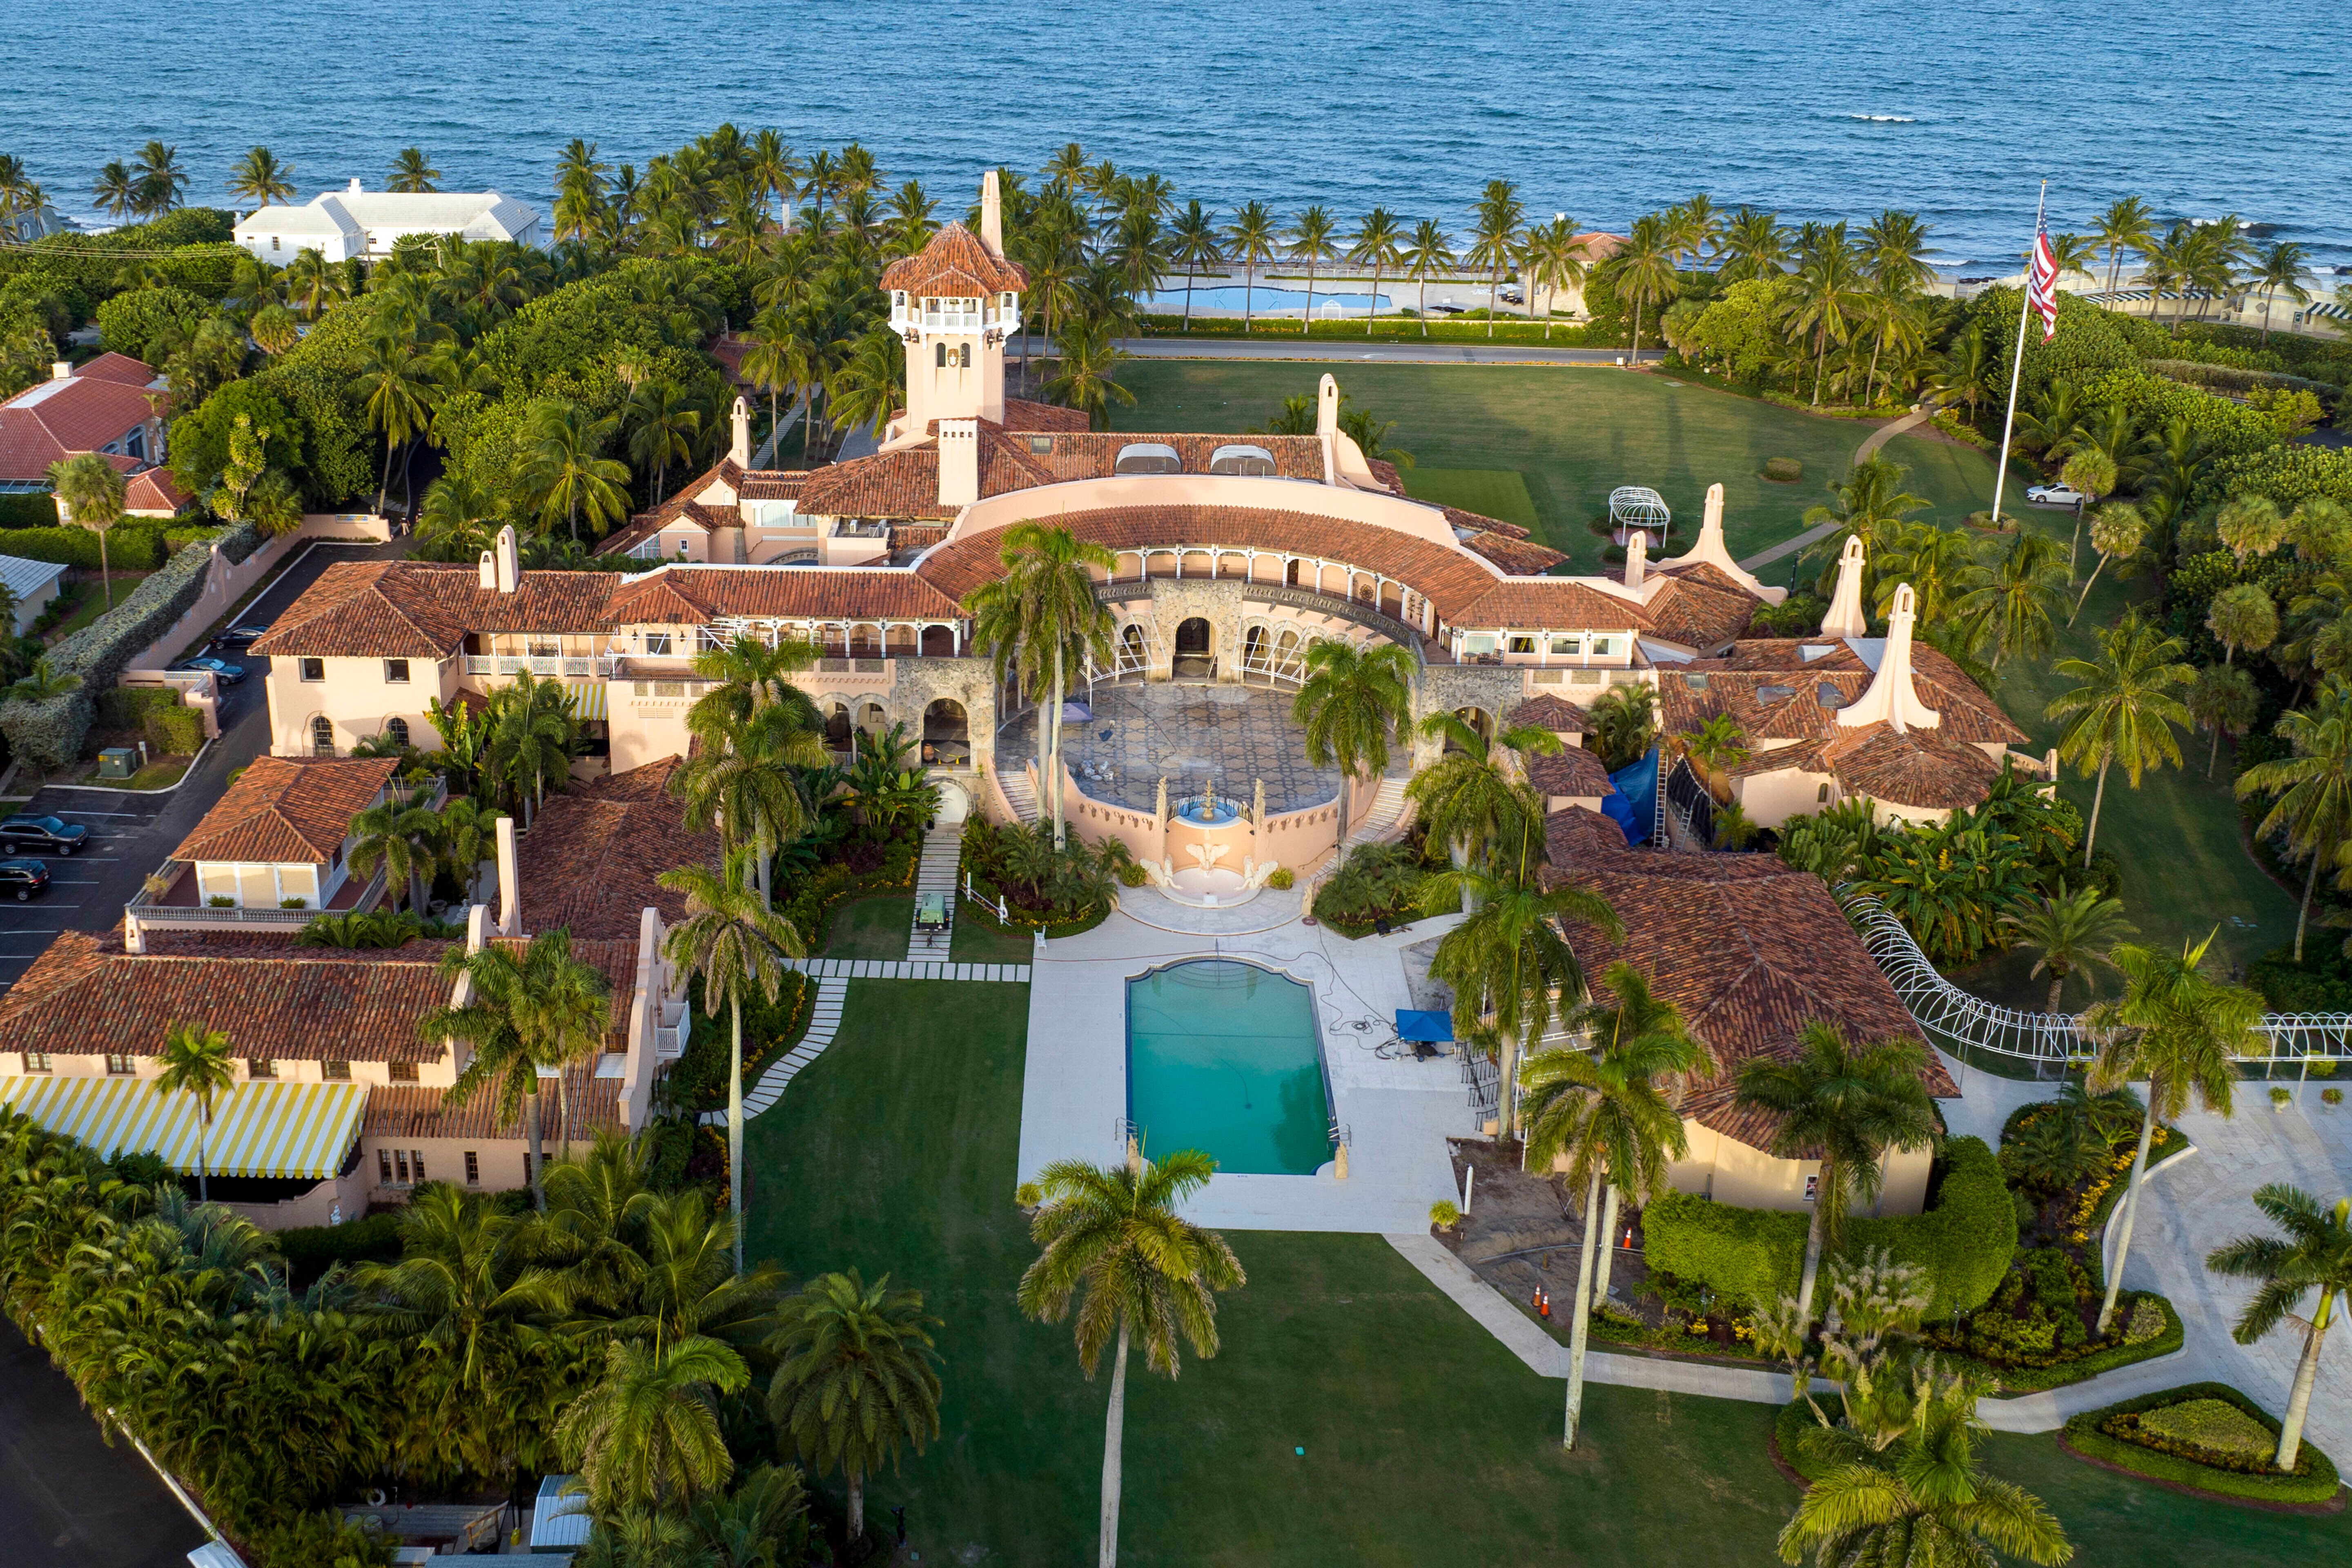 Trump’s Mar-a-Lago private club and residence in Palm Beach, Florida